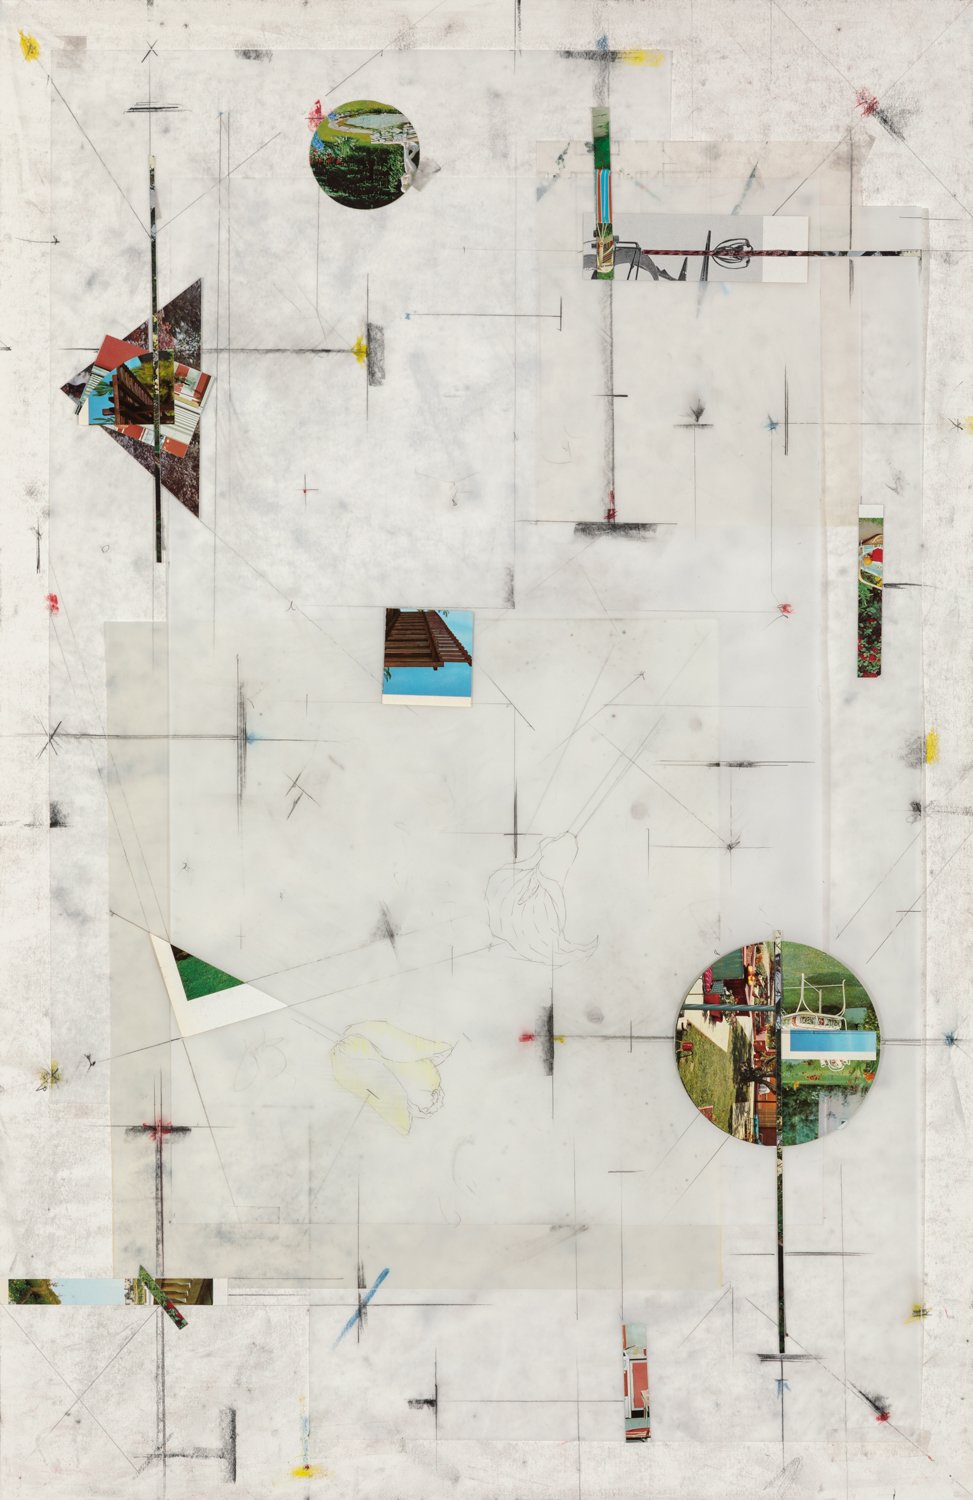  Untitled, 2021, graphite, colored pencil and collage on paper and mylar, 36 x 24 inches/ 91,5 x 61 cm 